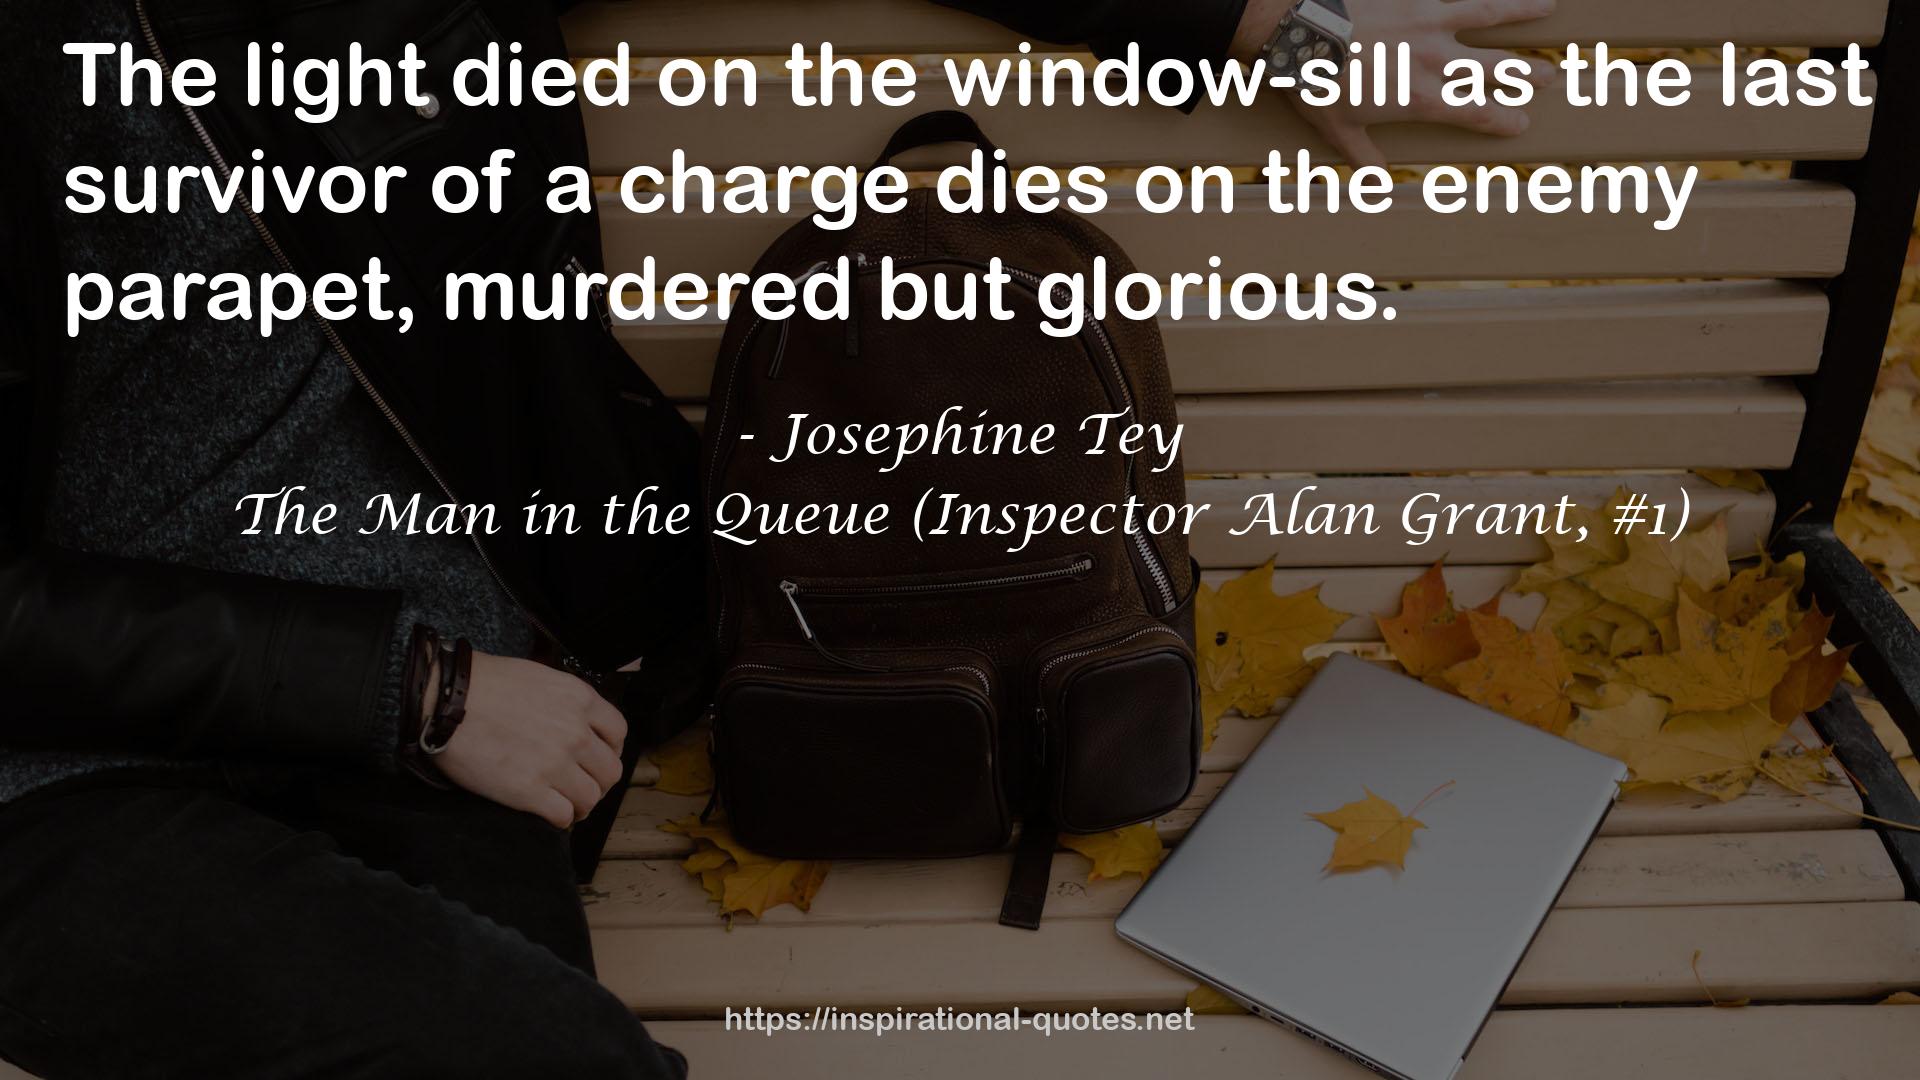 The Man in the Queue (Inspector Alan Grant, #1) QUOTES